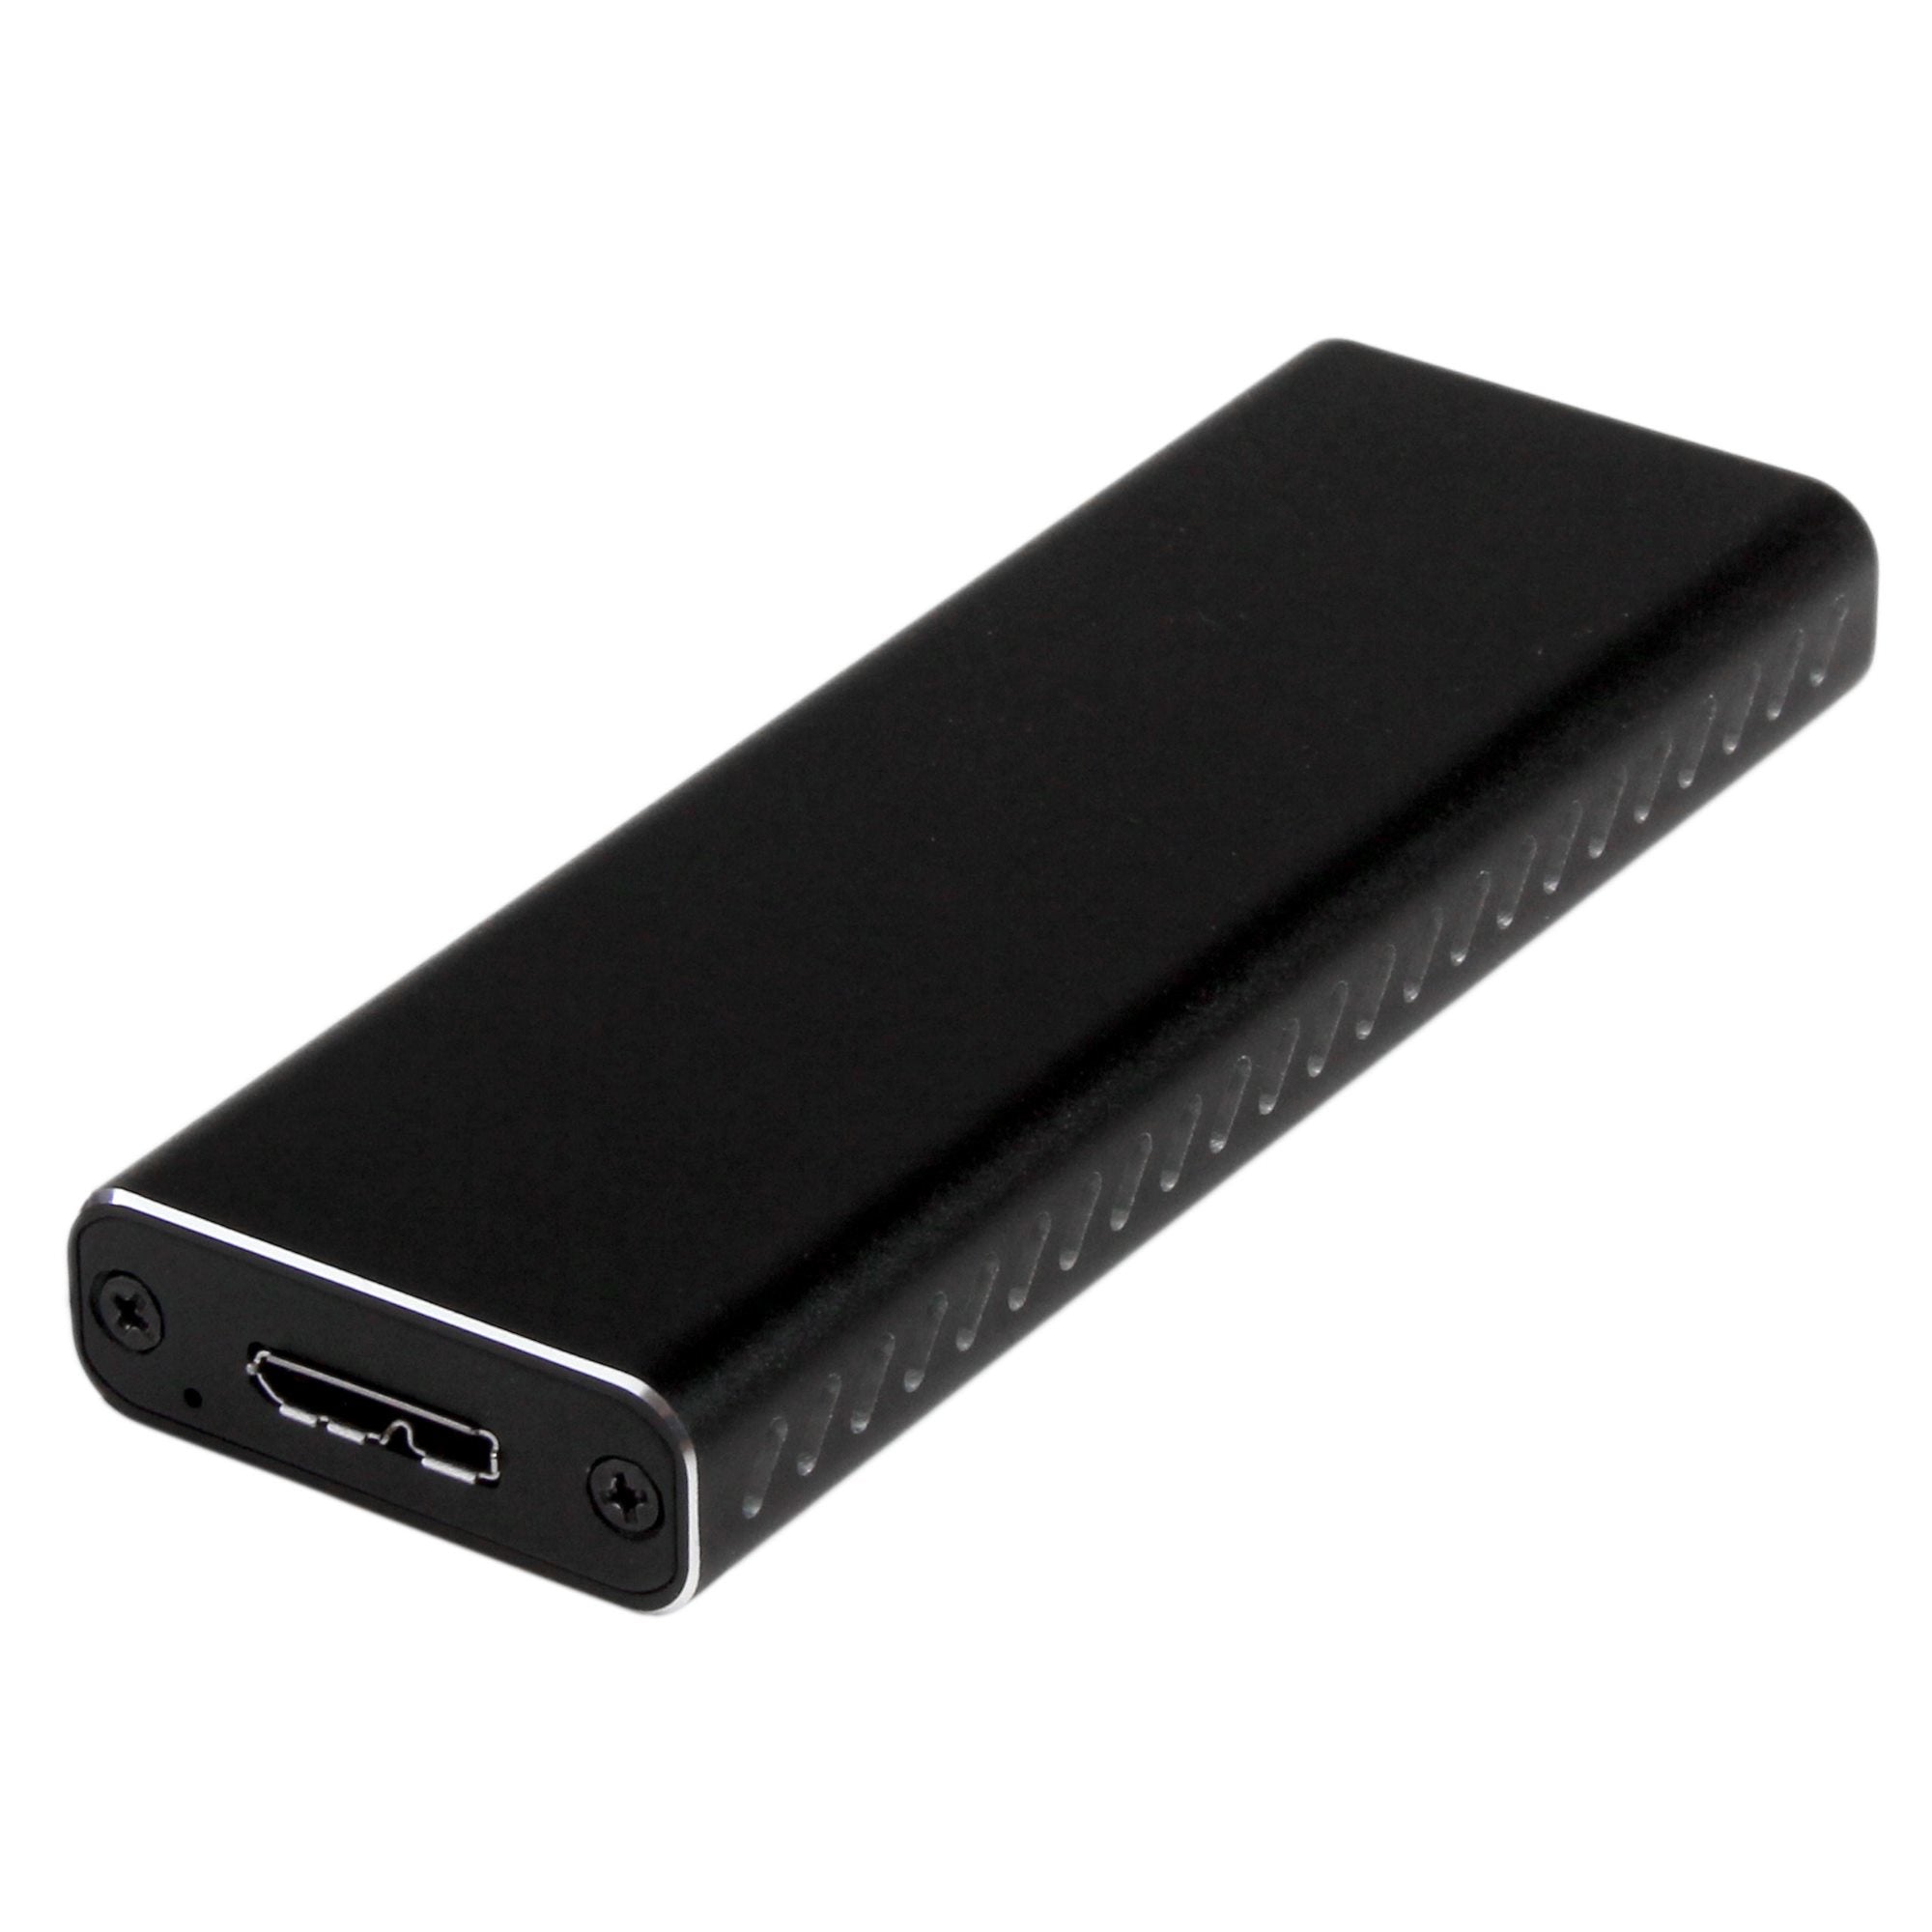 Startech M.2 SSD Enclosure For M.2 Sata SSDs - USB 3.0 (5Gbps) With Uasp-(SM2NGFFMBU33)